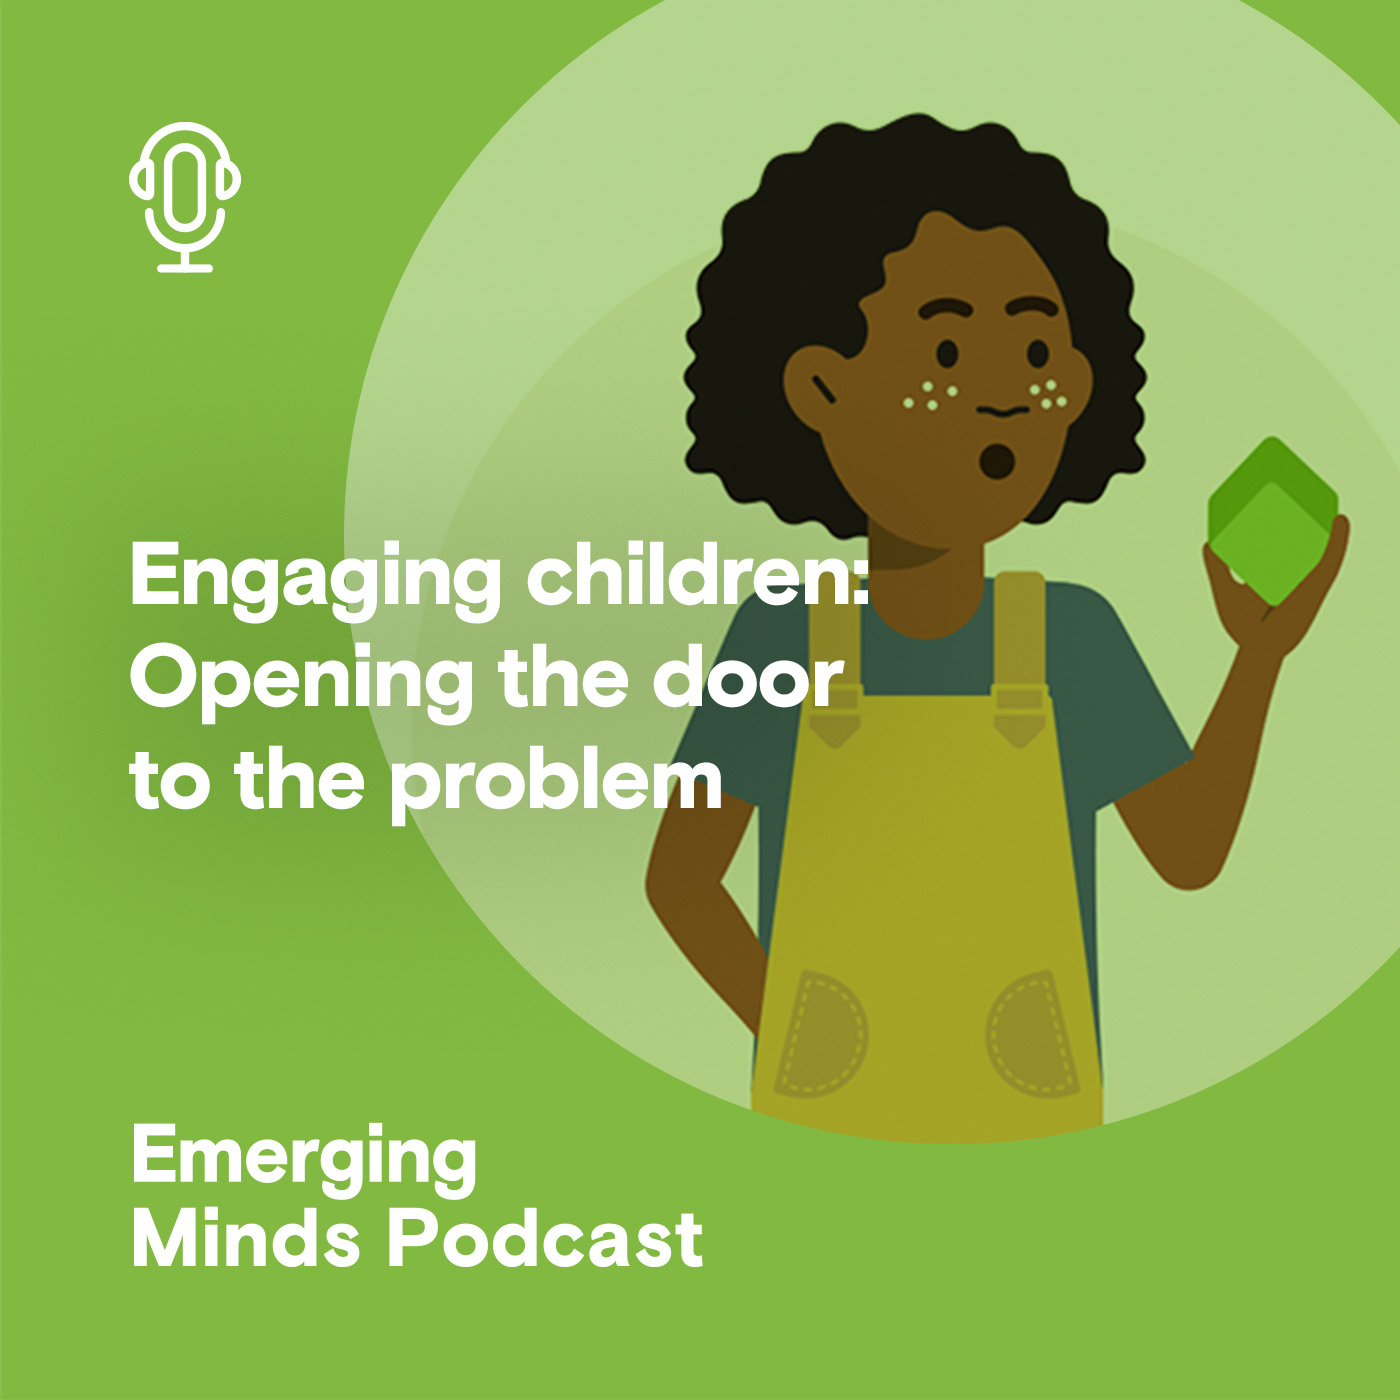 Engaging children: Opening the door to the problem